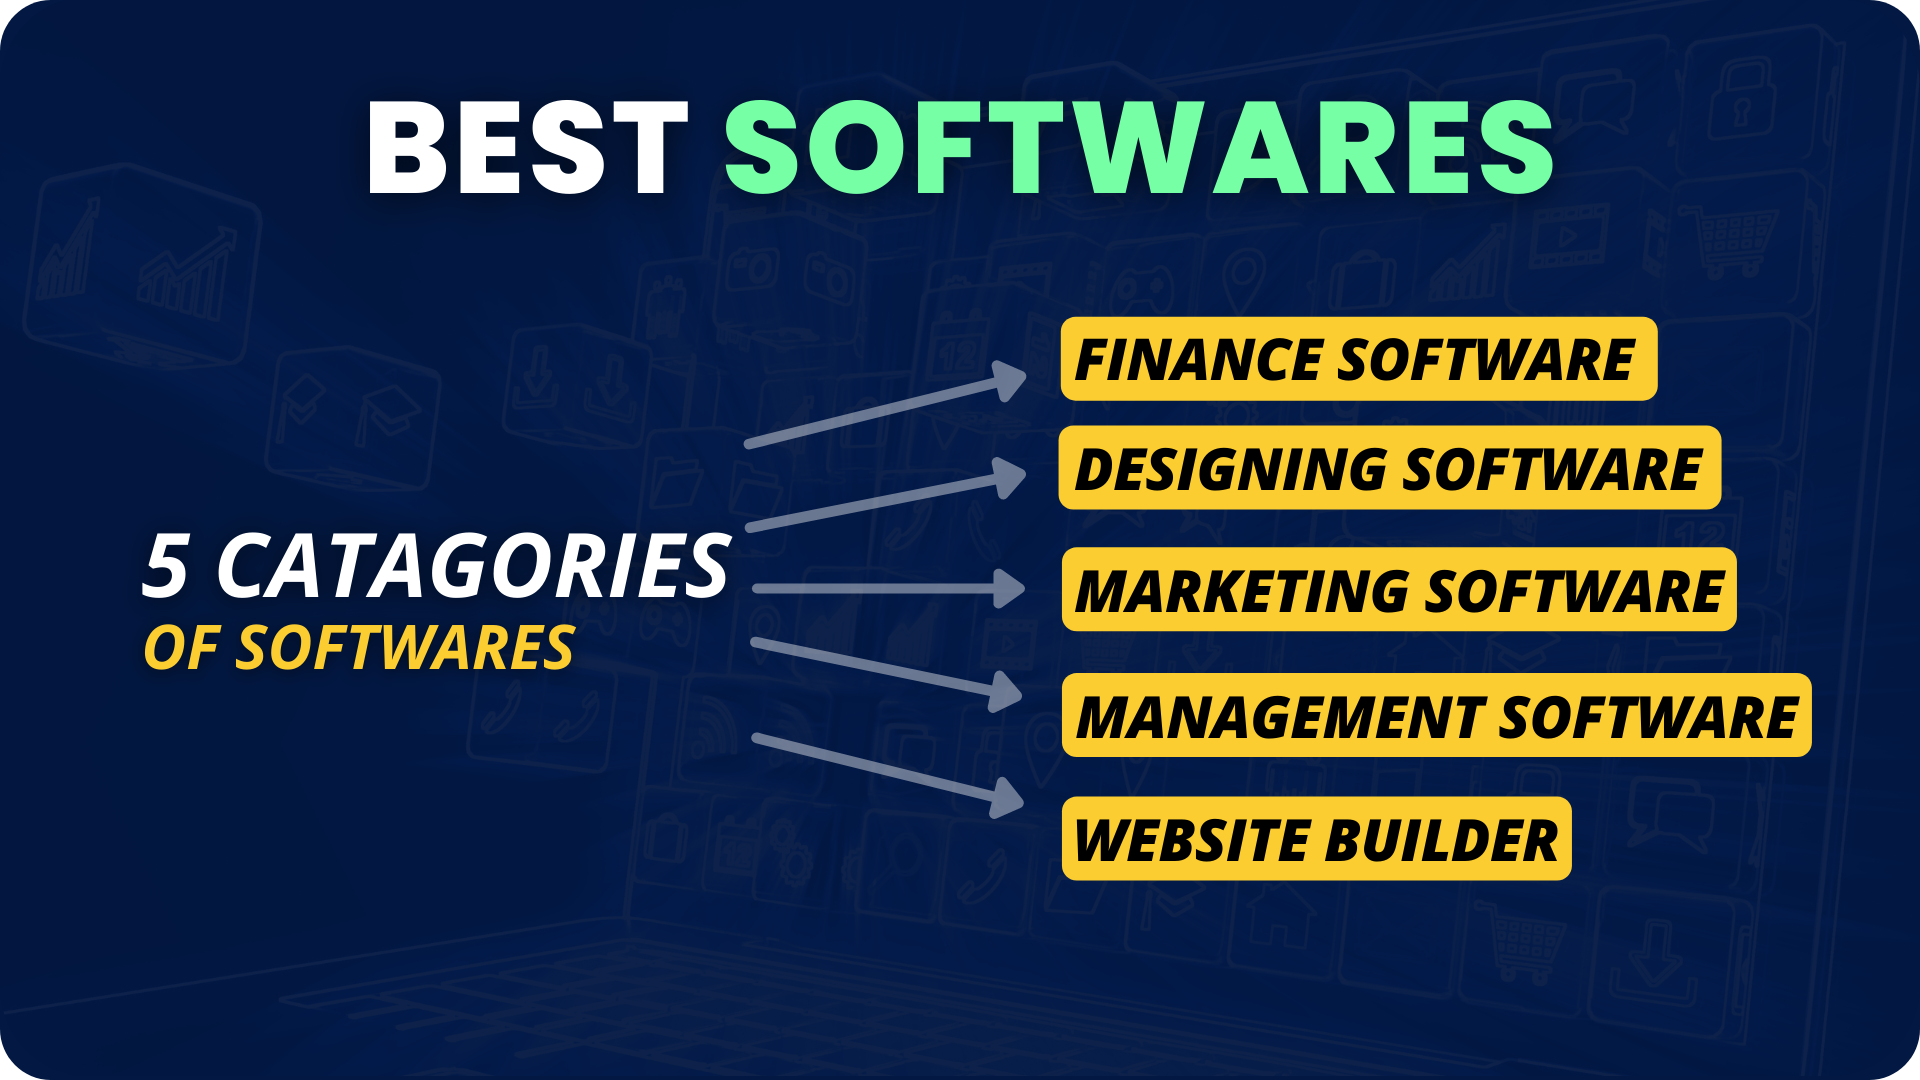 Best Software For Businesses